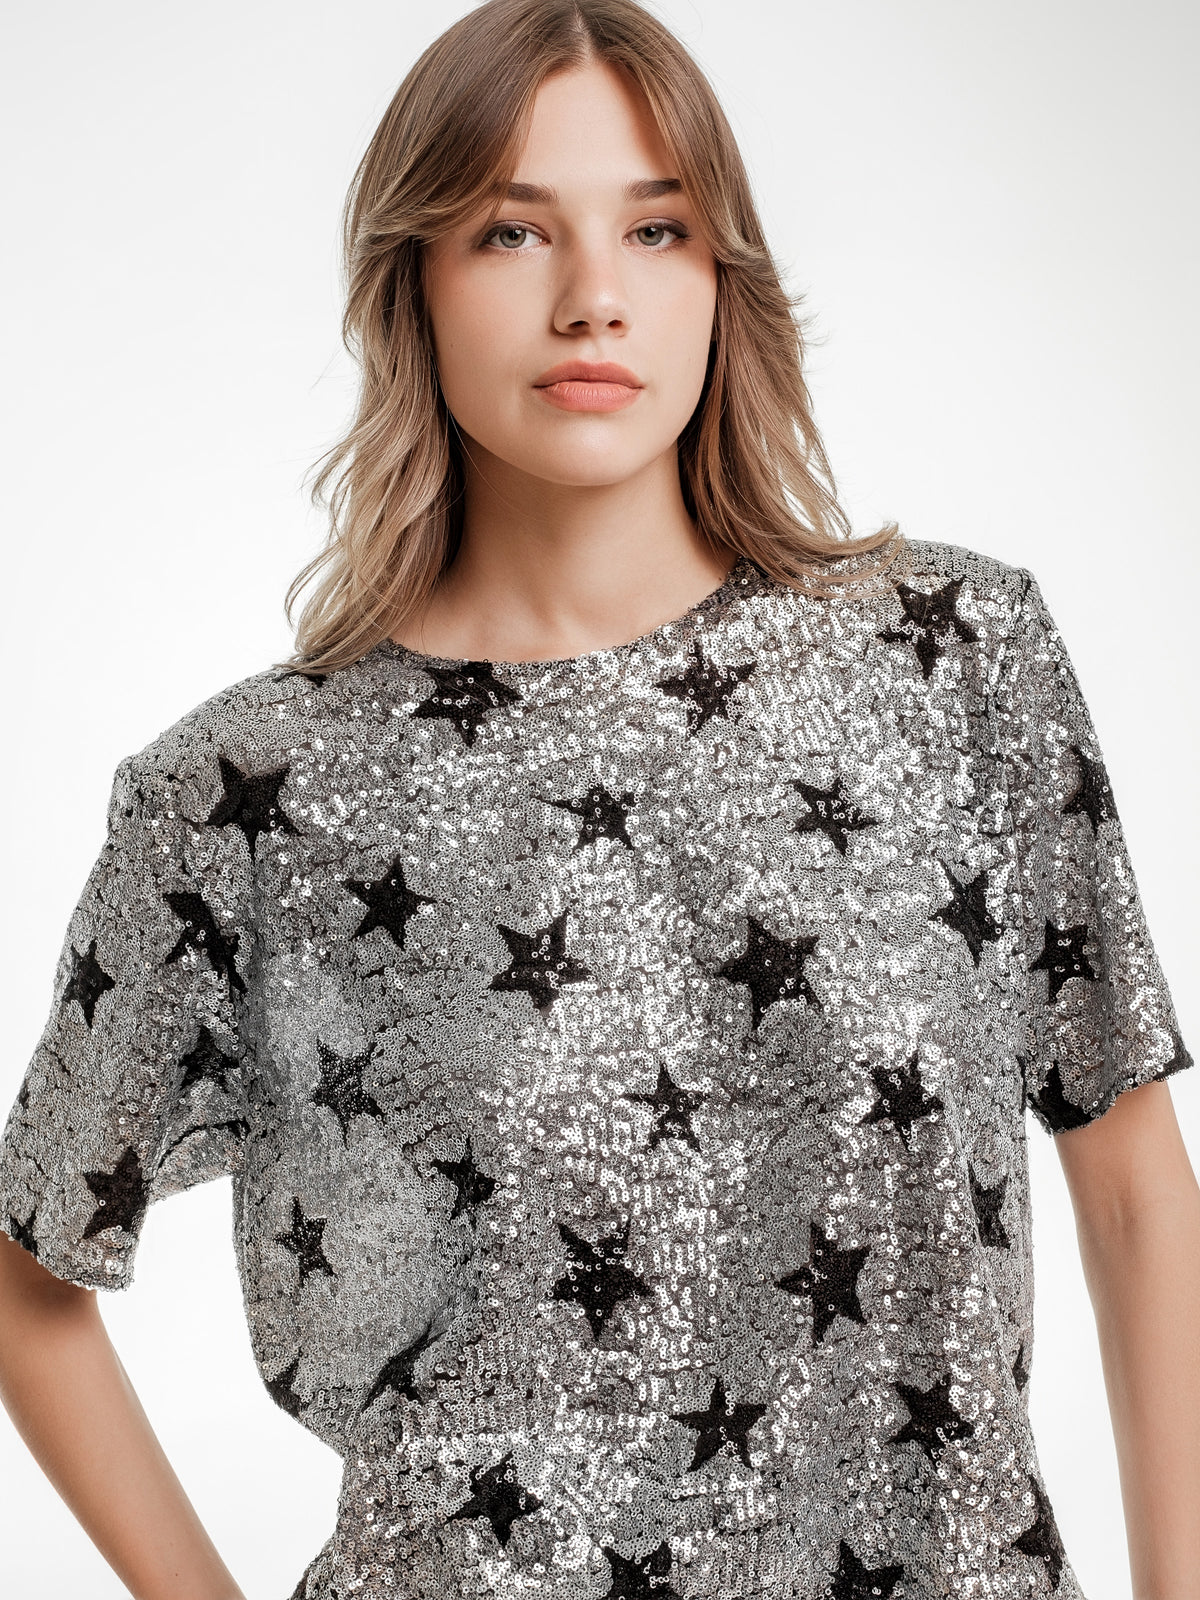 silver glitter top with stars